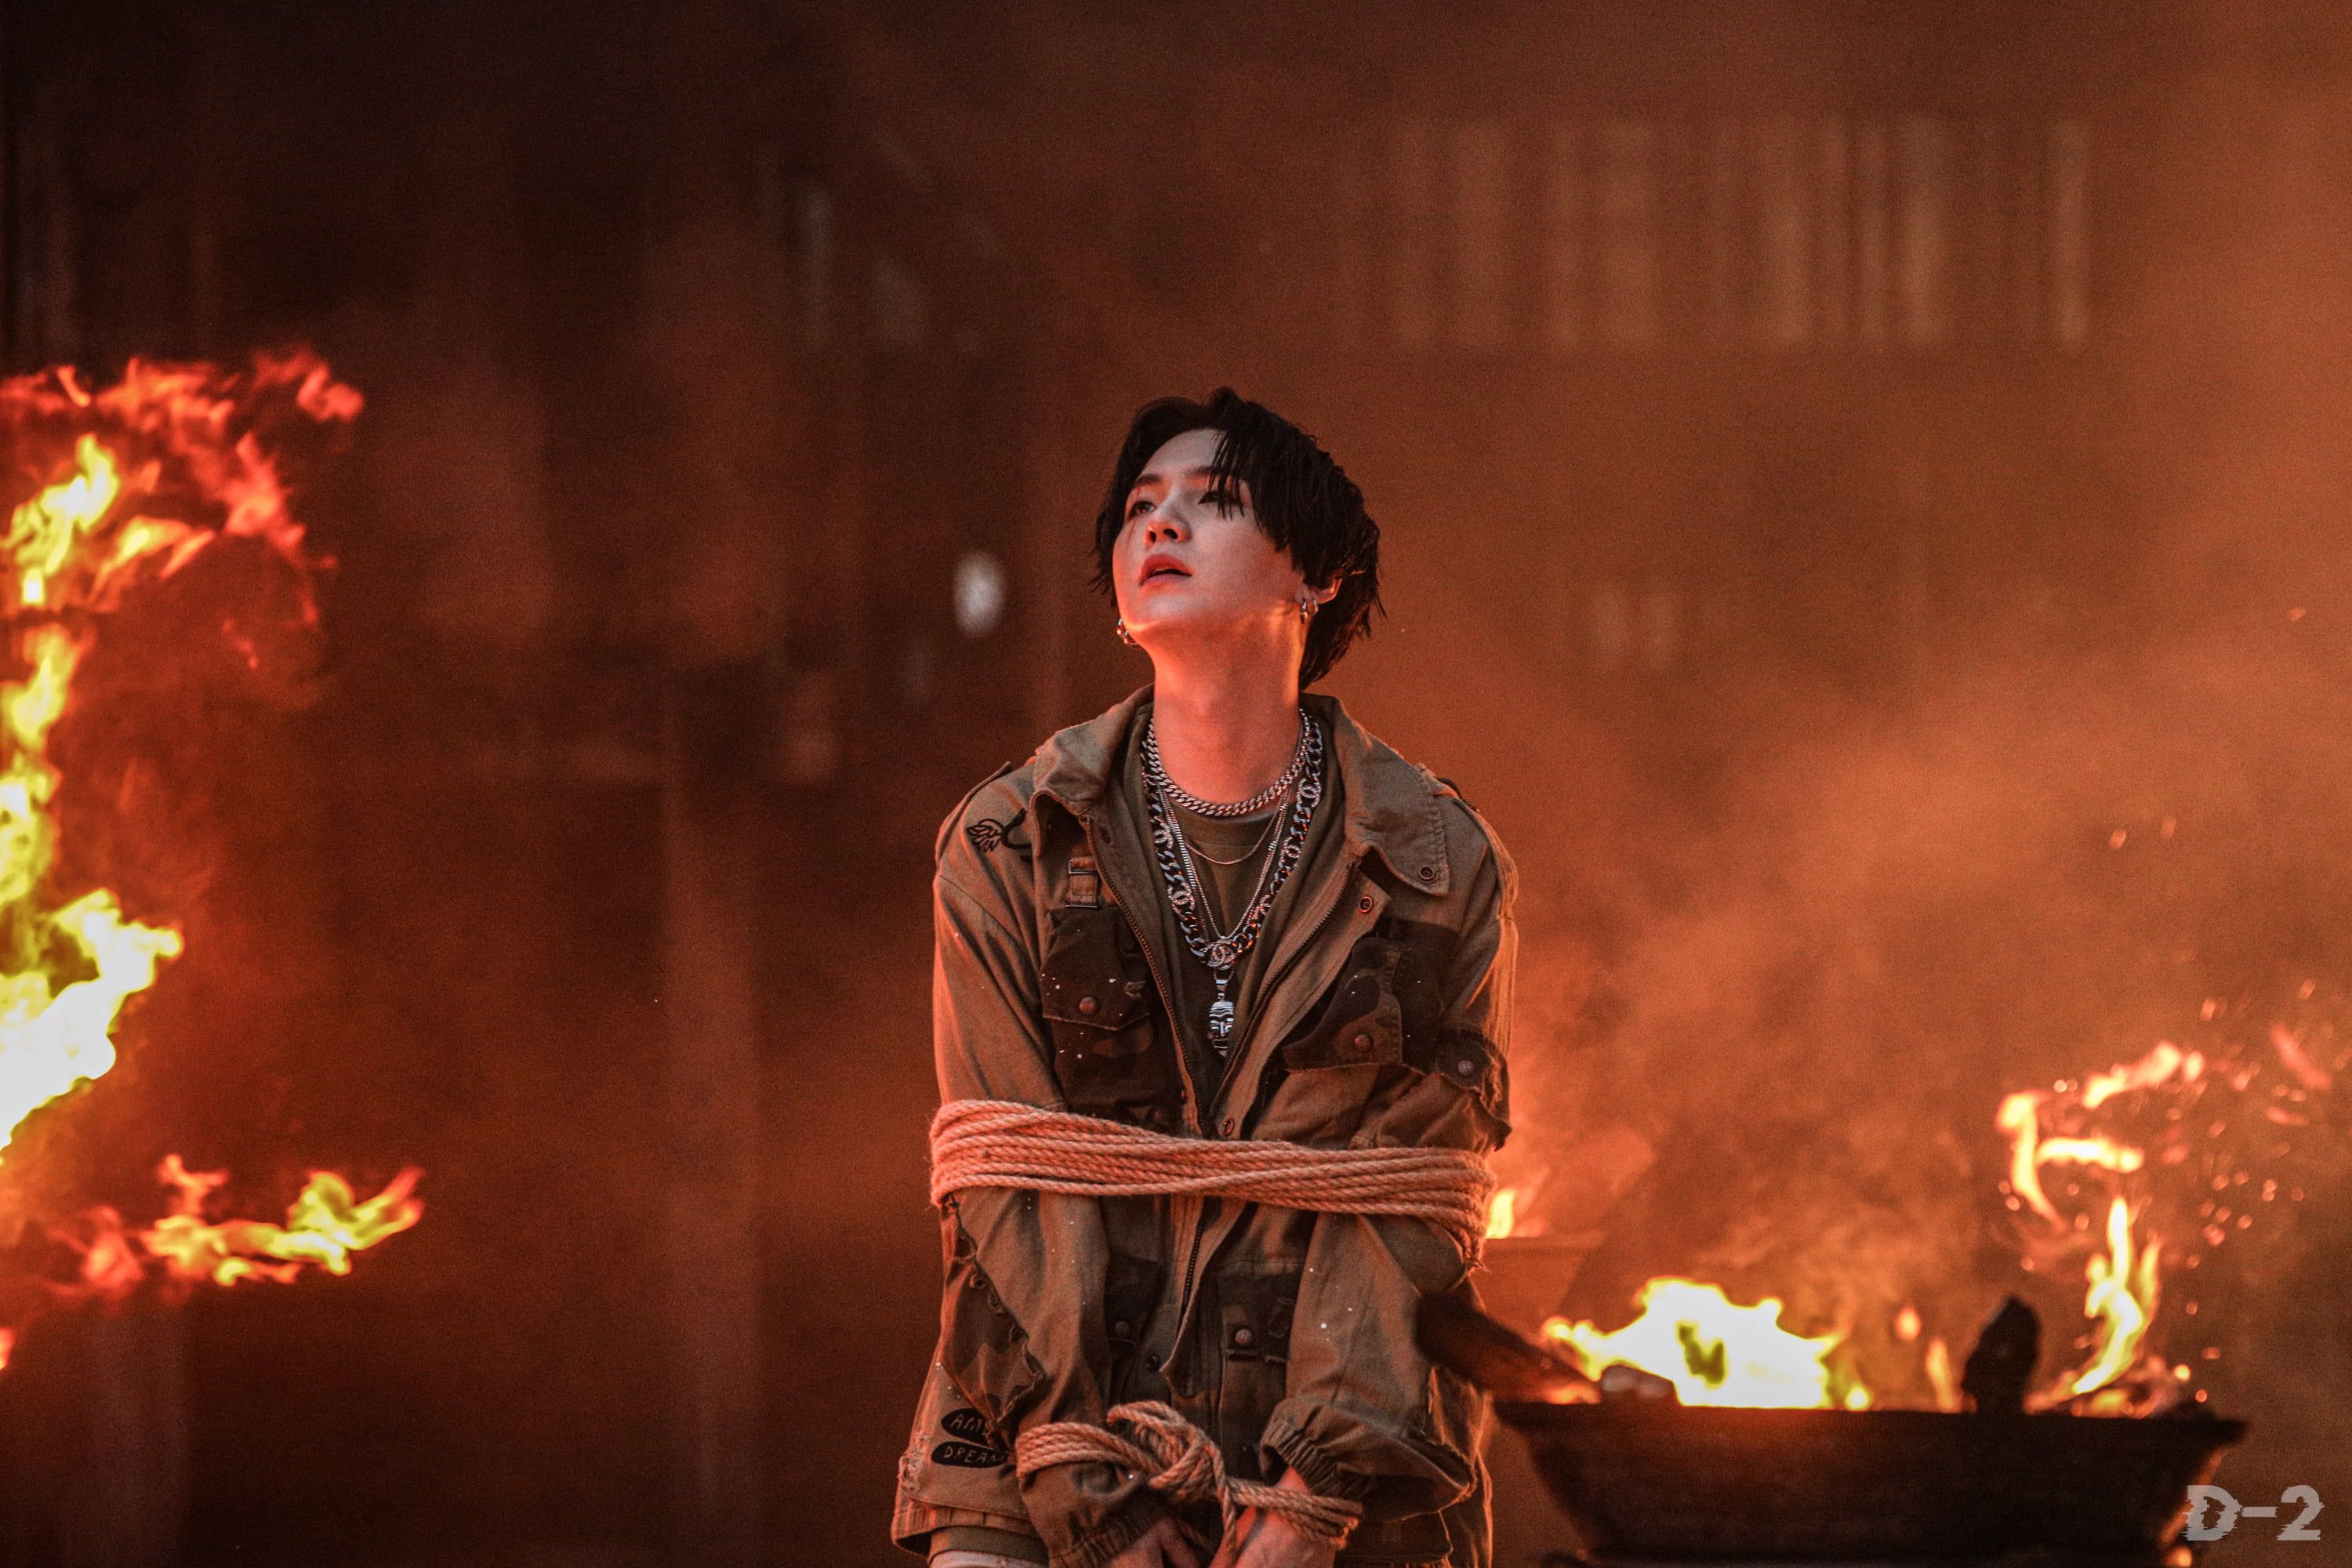 The last image of the series, which shows a man tied up in front of a fire, is the most intense. - Suga